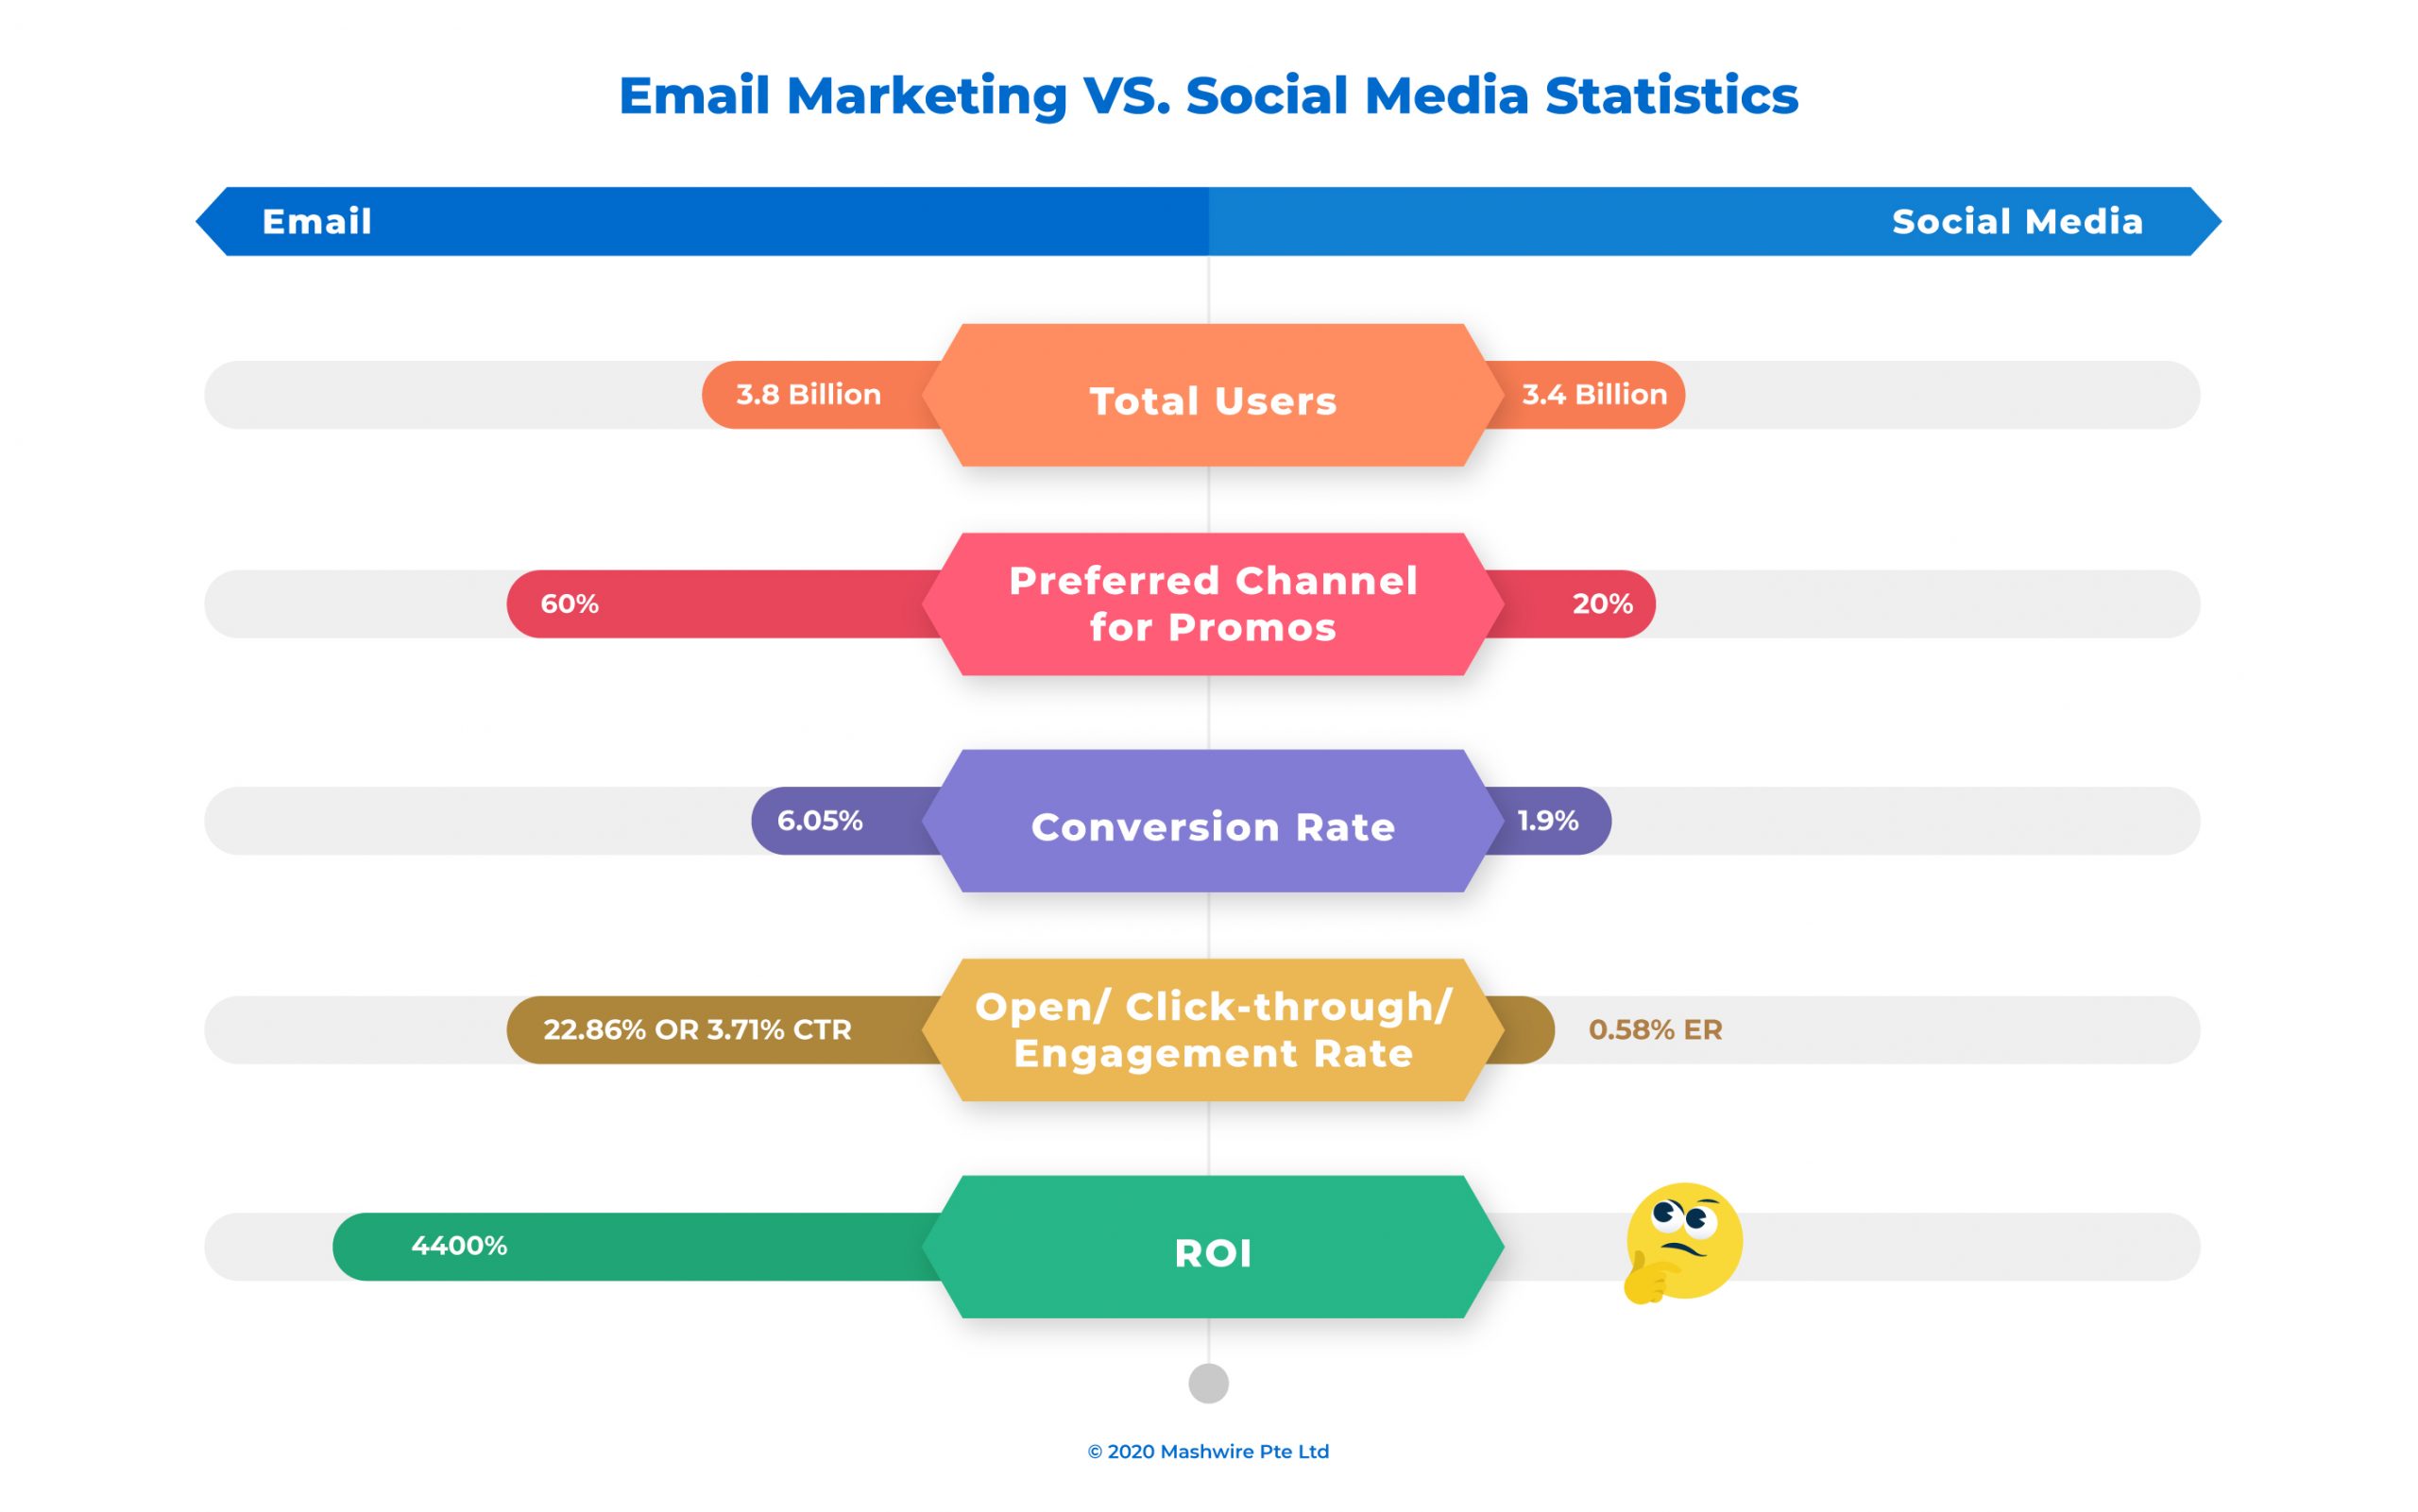 Is Email Marketing Still Effective In 2020?